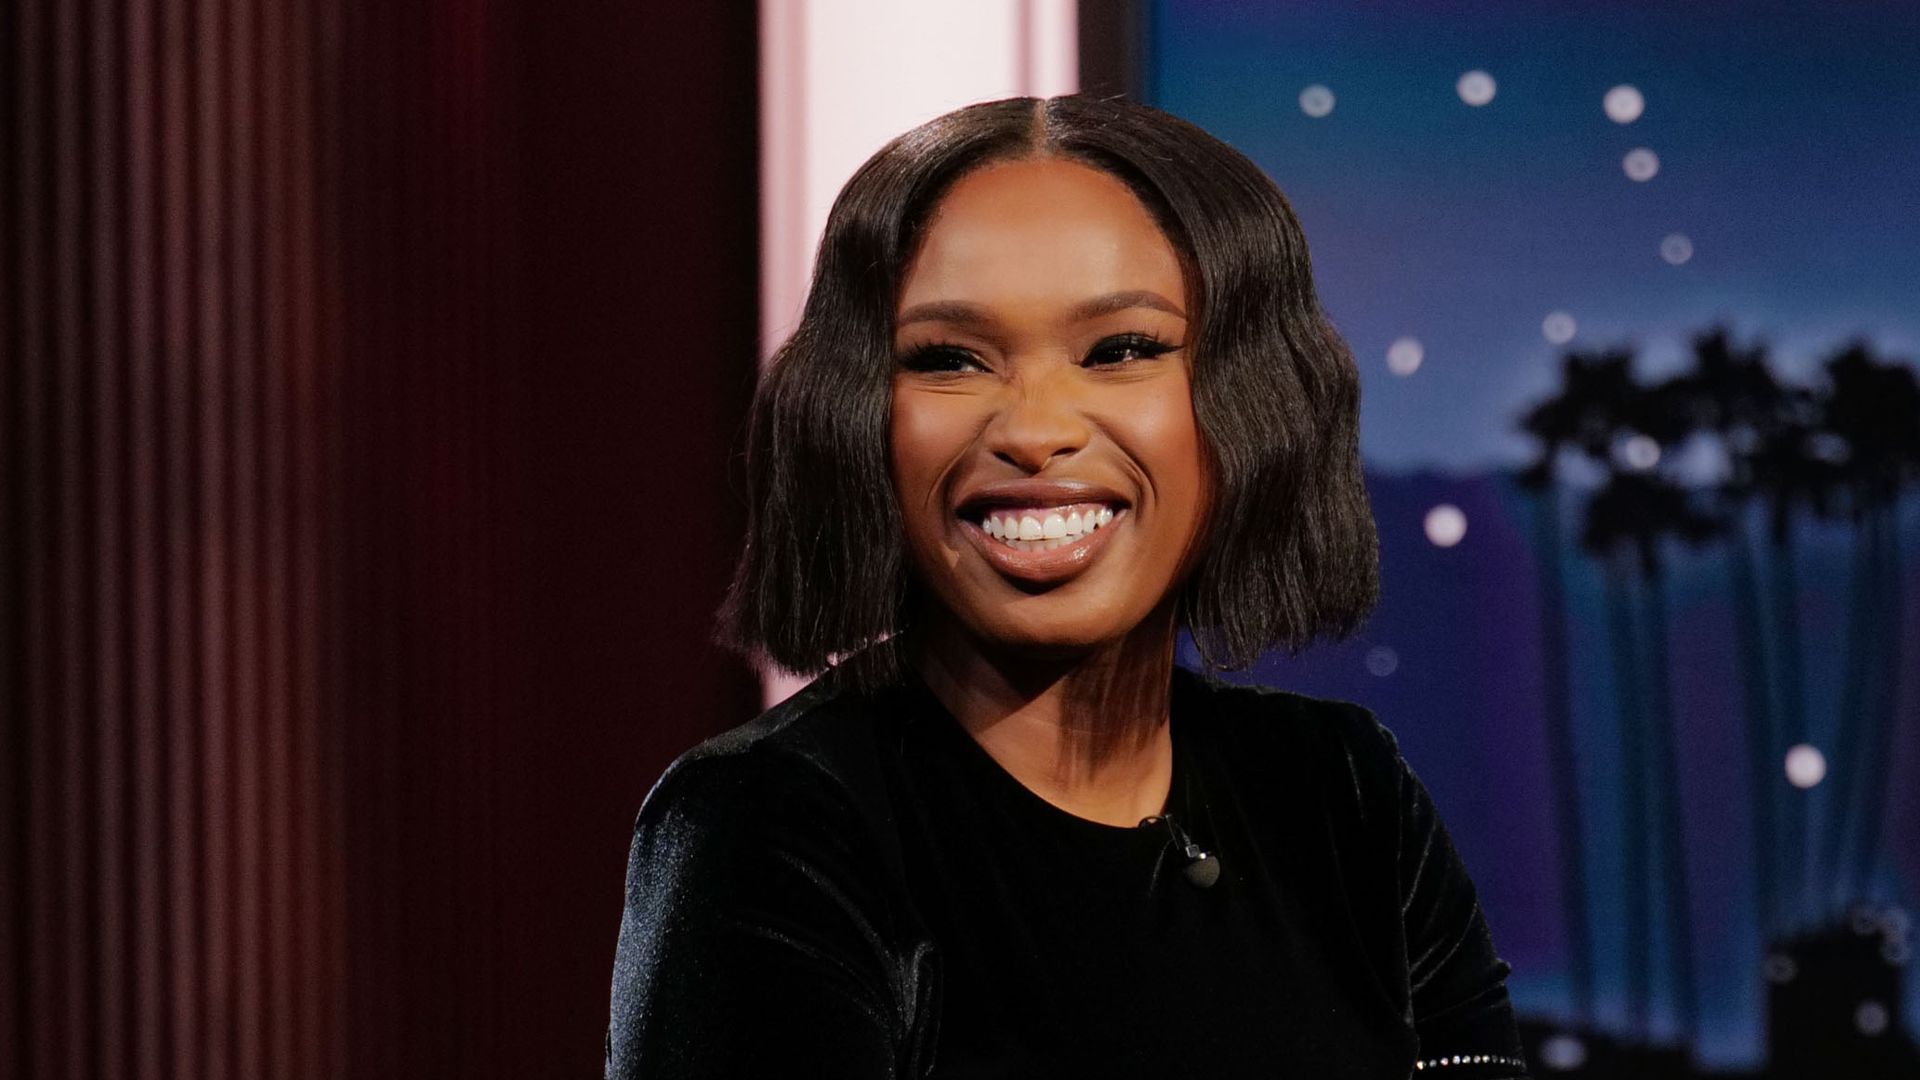 JIMMY KIMMEL LIVE! The guests for Monday, March 20 included Jennifer Hudson (The Jennifer Hudson Show), Donnie Yen (John Wick Chapter Four), and musical guest Larkin Poe.